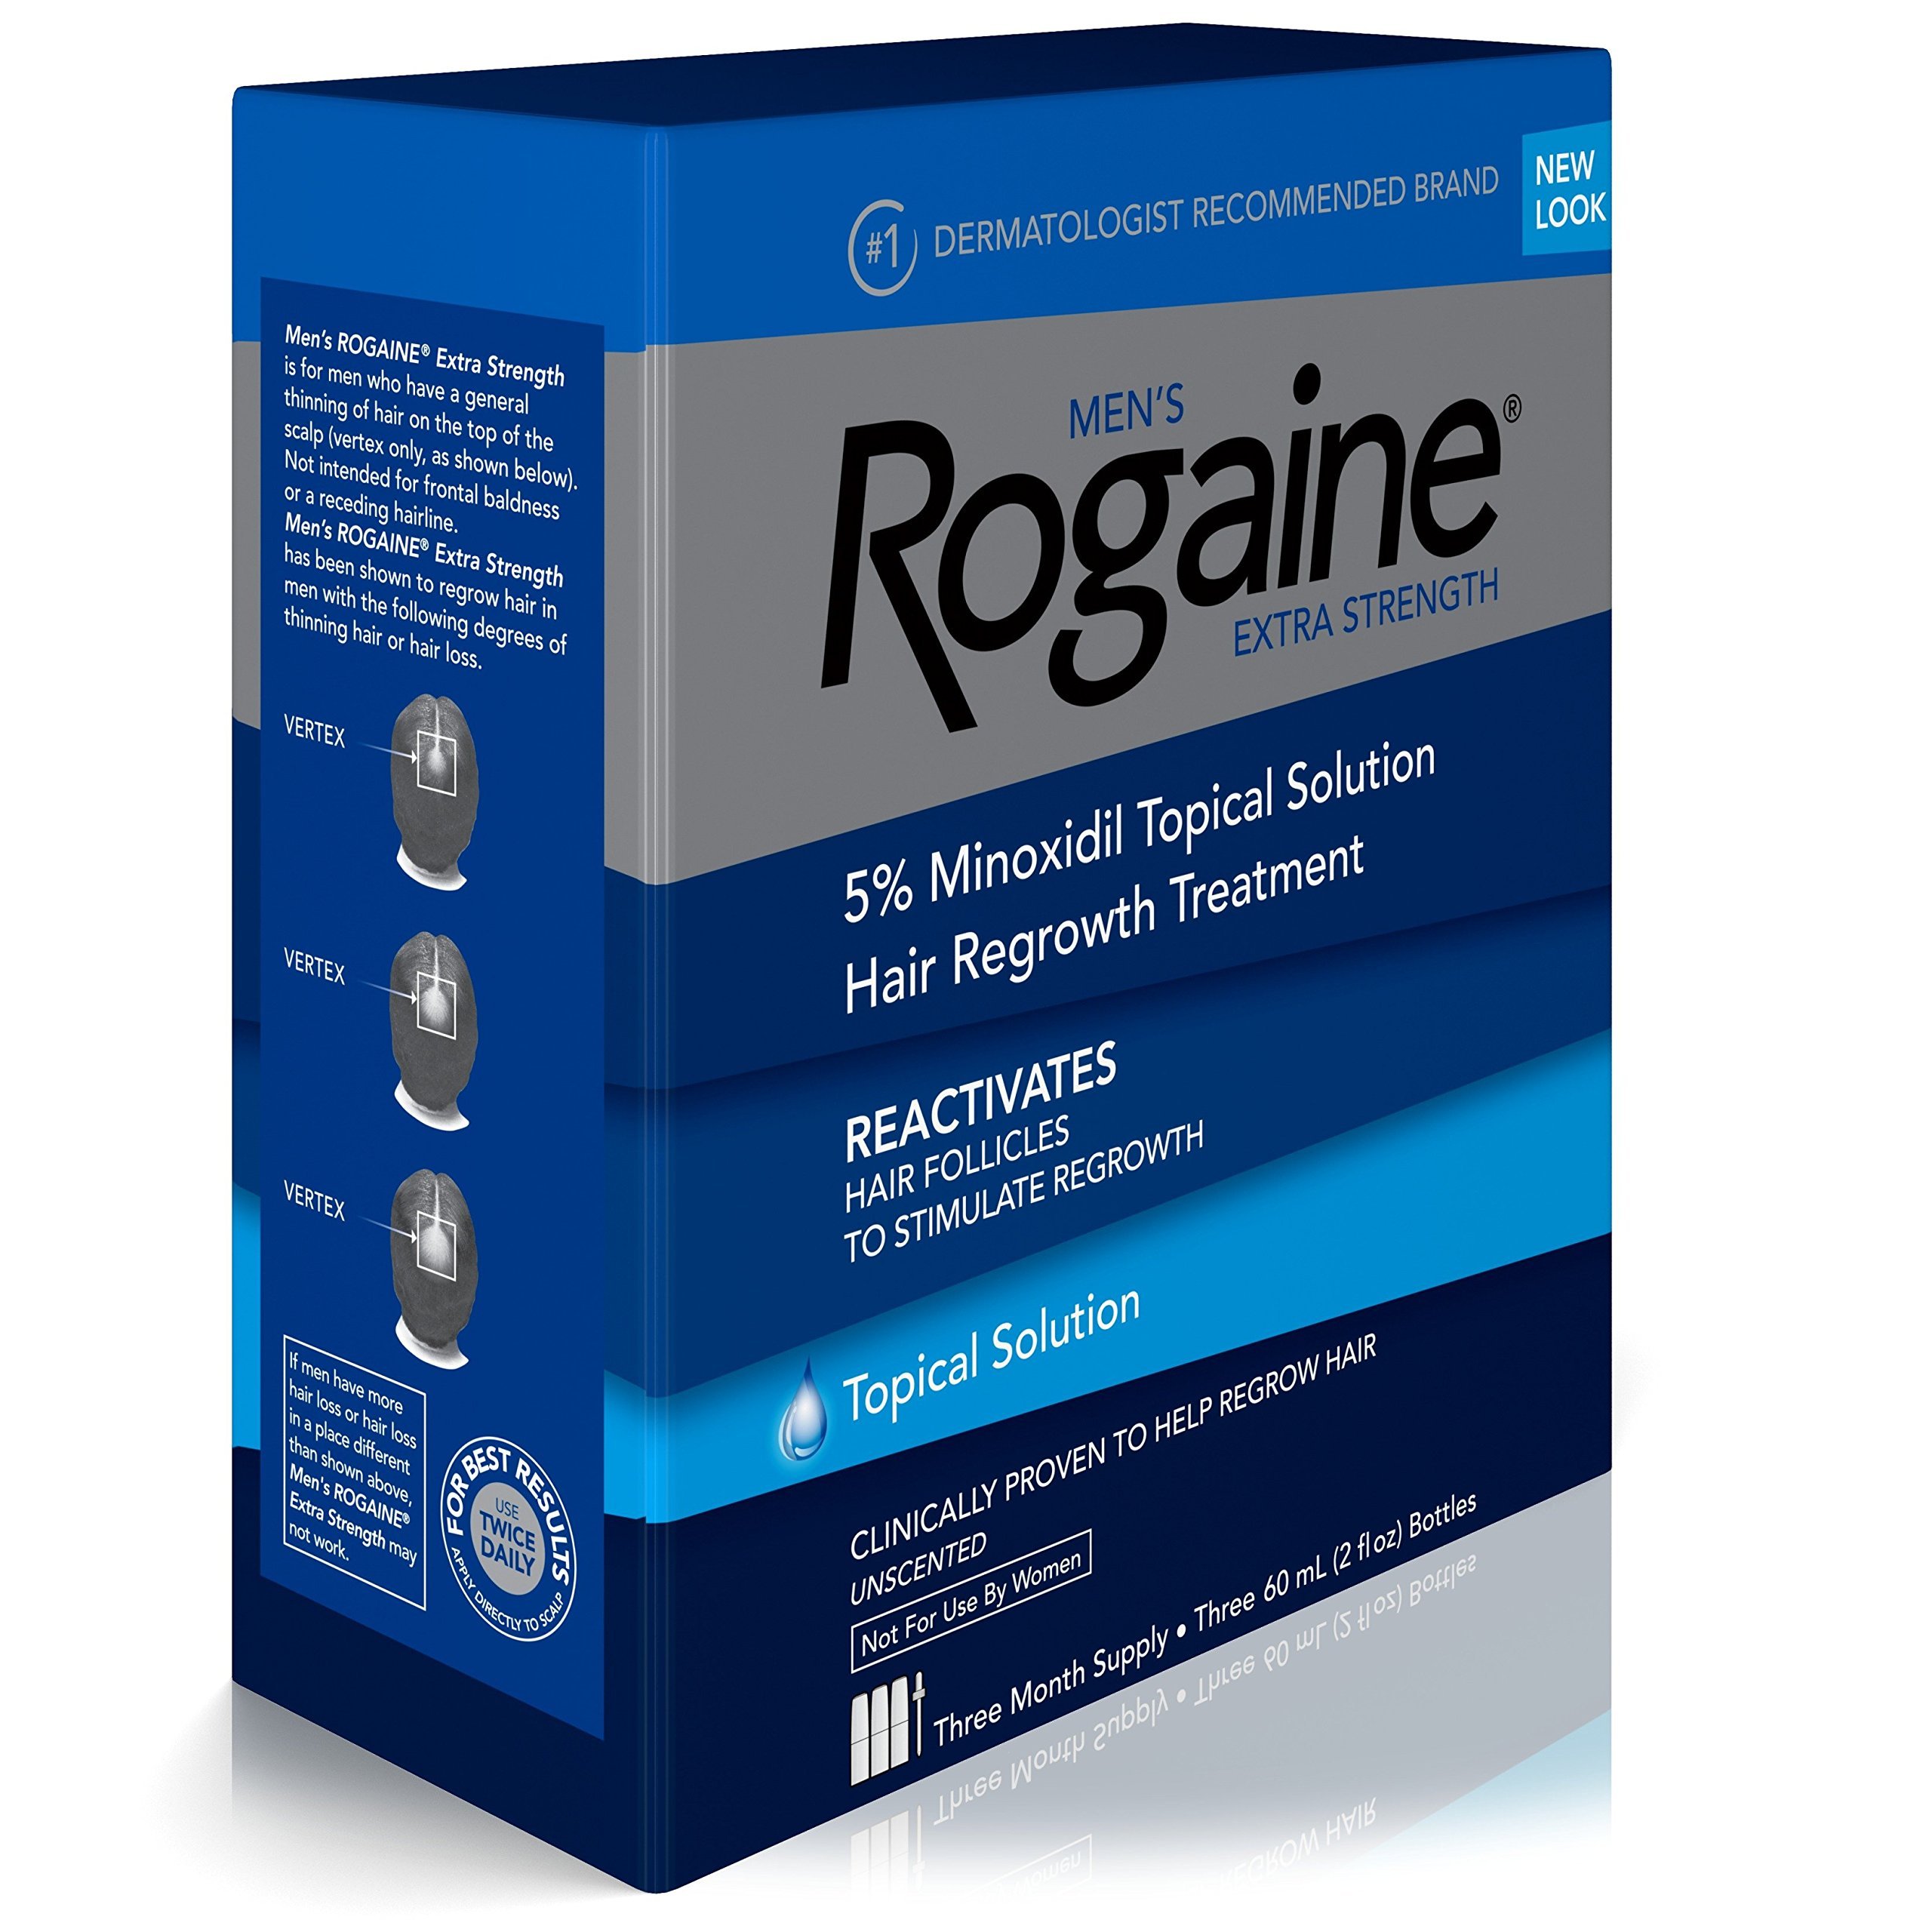 Men's Rogaine Extra Strength 5% Minoxidil Topical Solution for Hair Loss & Hair Regrowth, Topical Hair Regrowth Treatment for Men, Unscented Minoxidil Liquid, 3-Month Supply, 3 x 2 fl. oz